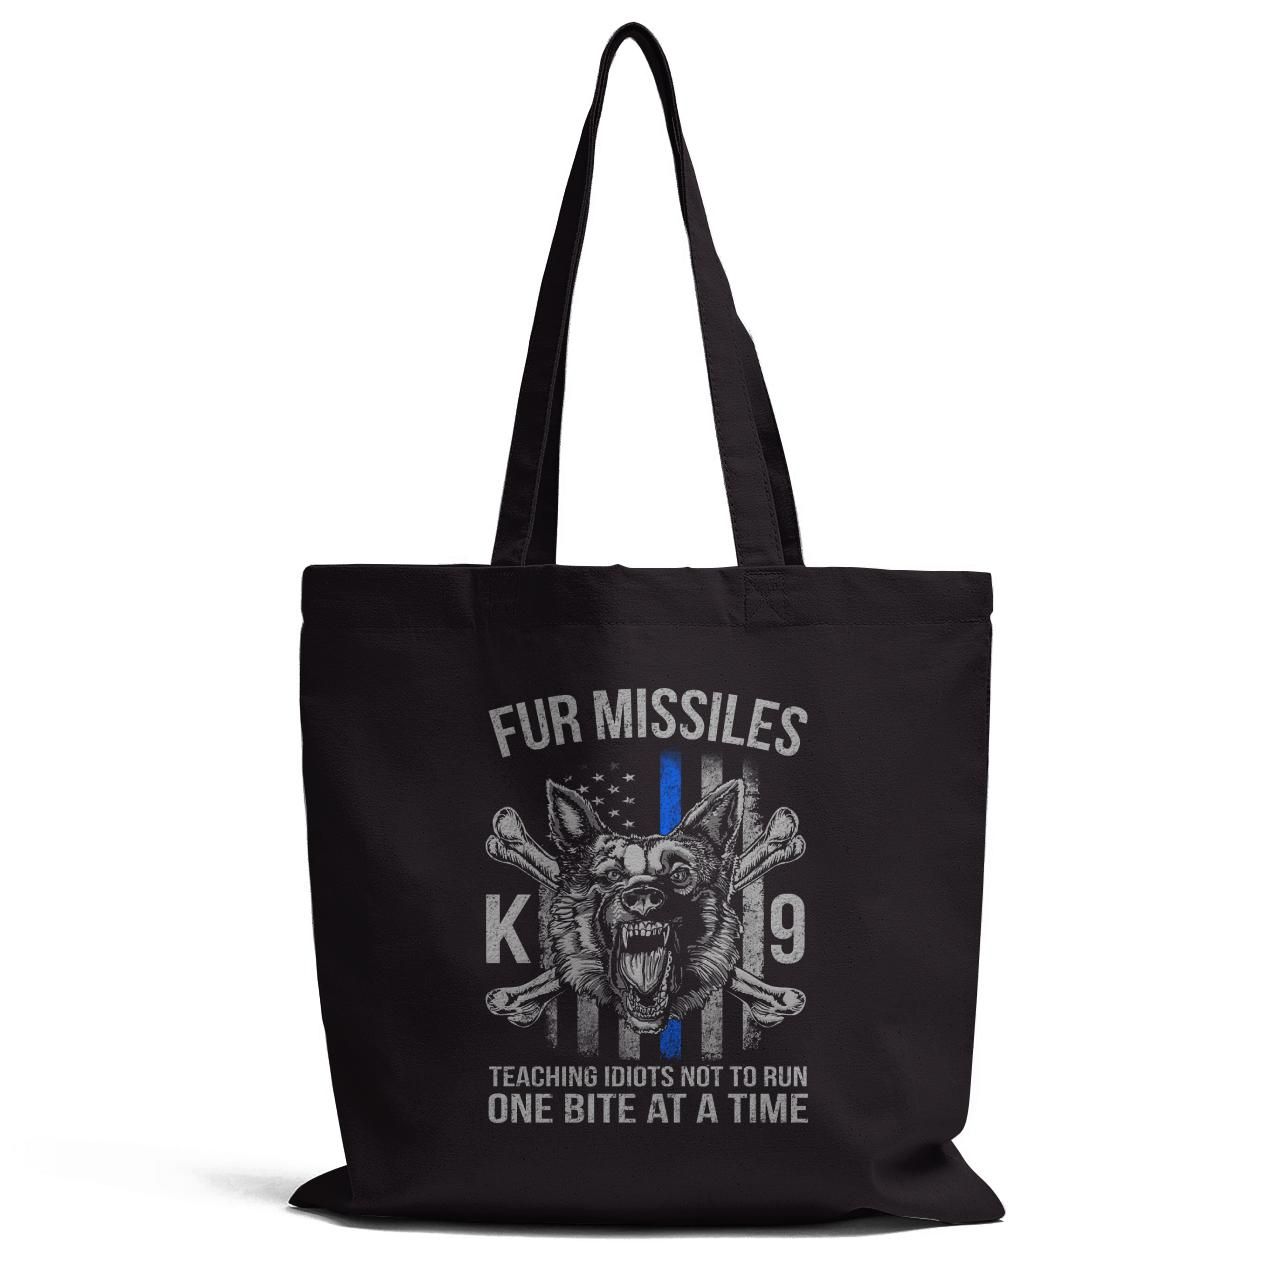 Teaching Idiots Not To Run One Bite At A Time Tote Bag